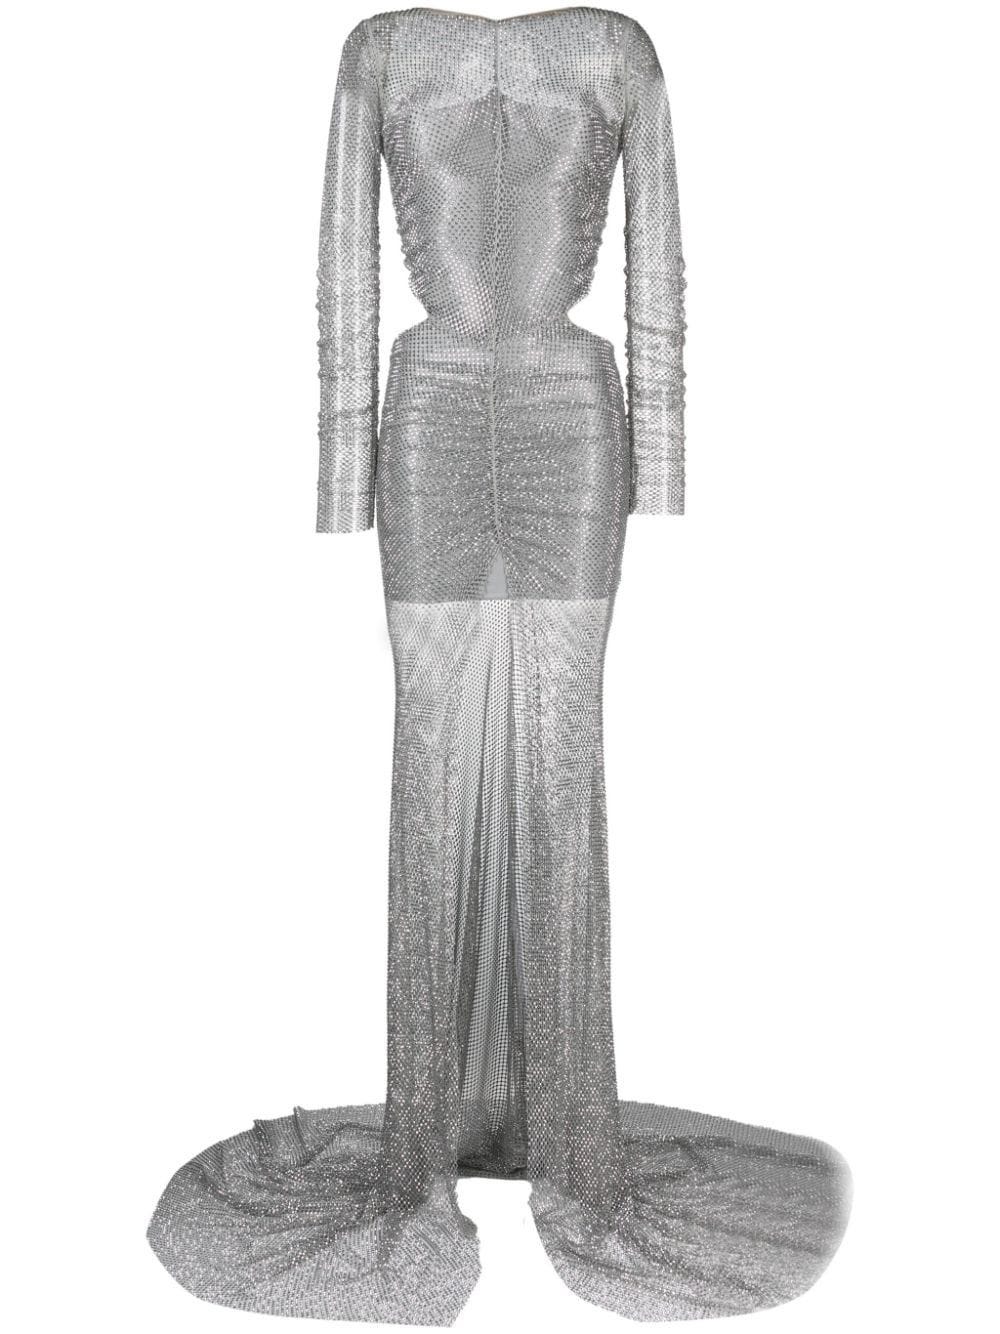 GIUSEPPE DI MORABITO SILVER LONG DRESS WITH CRYSTAL DECORATION